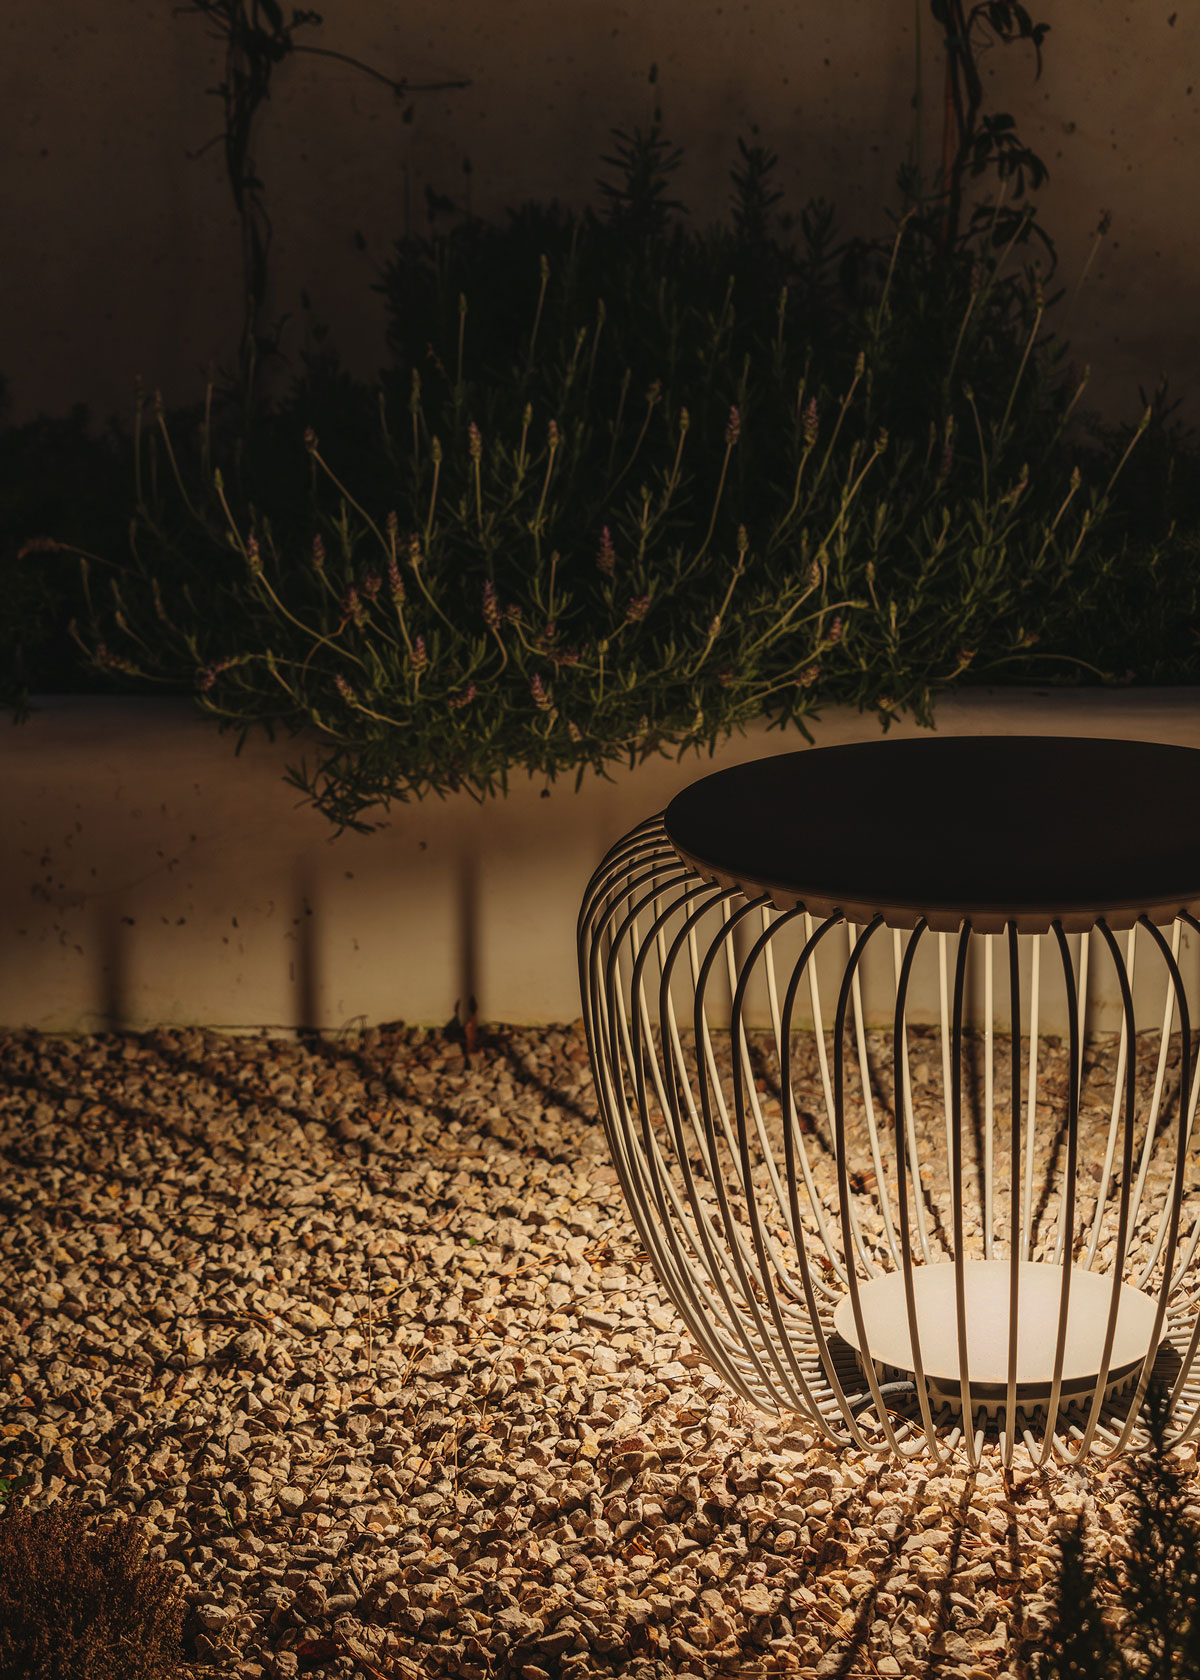 Vibia The Edit - Outdoor collection complements the organic architecture - Meridiano